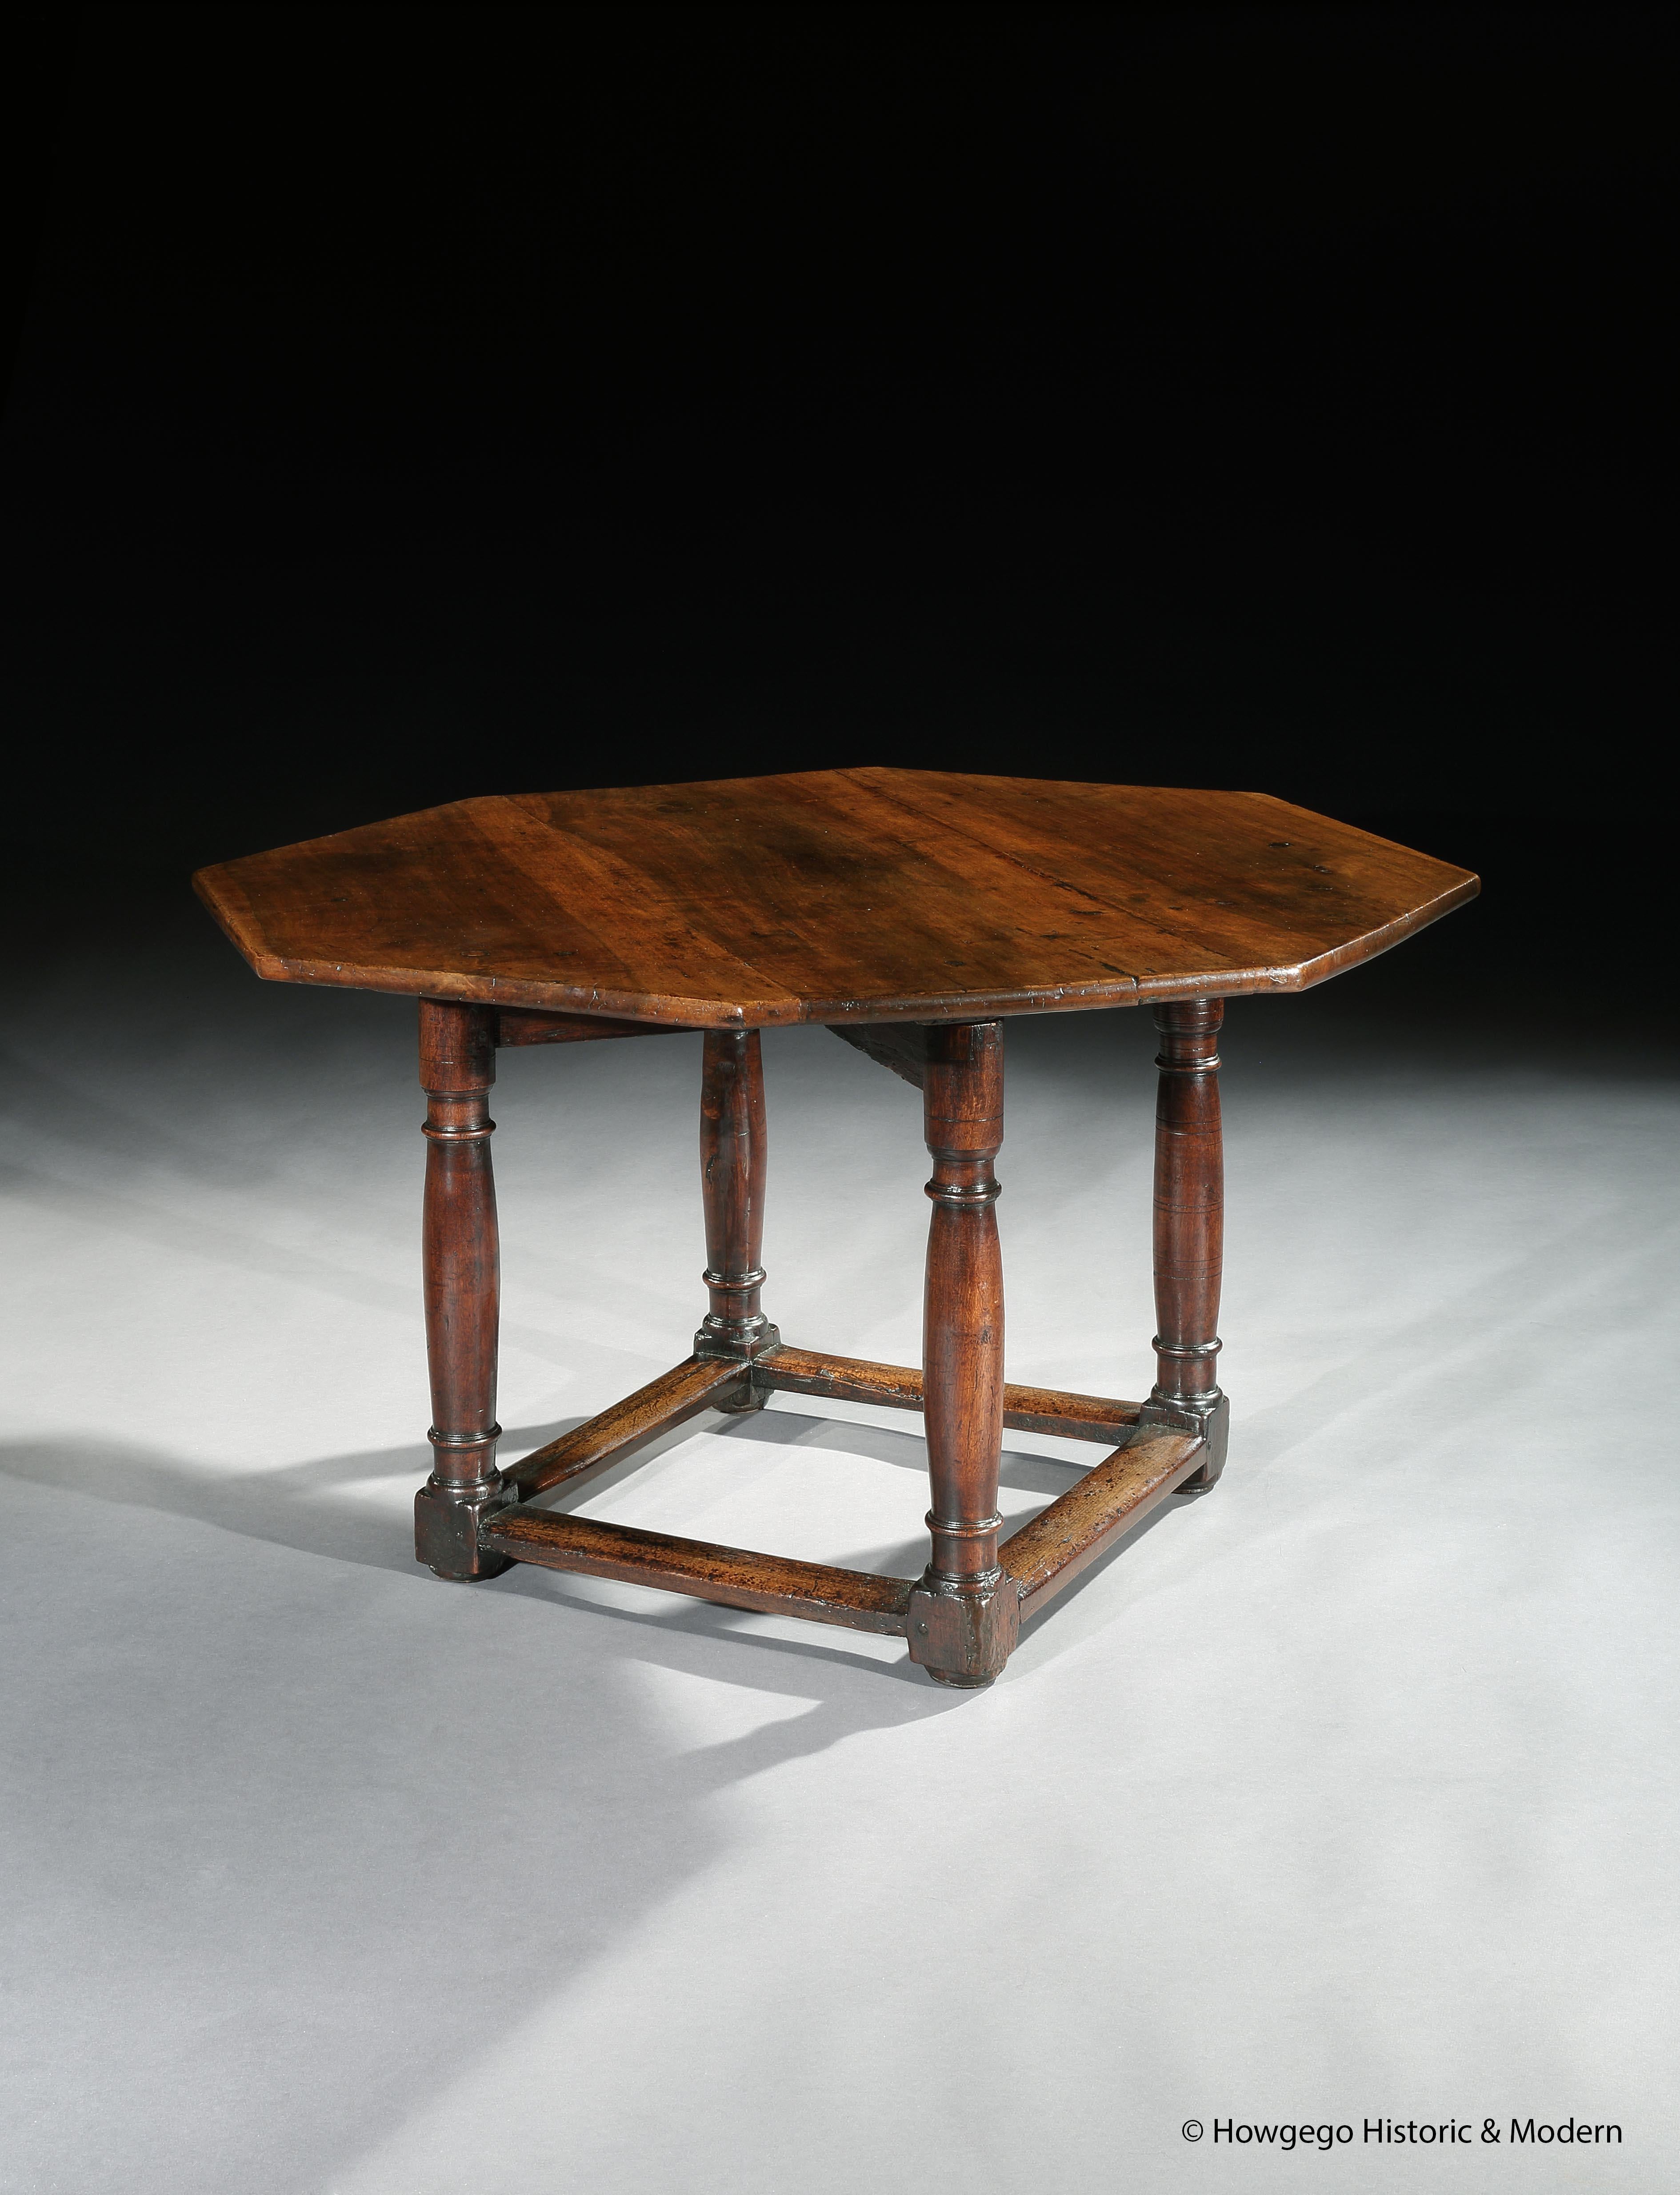 - This table is a rare and attractive octagonal form with characteristic Renaissance legs. 
- It can serve as centre, dining or writing table. 
- The sapwood creates a beautiful decorative effect and the table has a lovely mellow color and